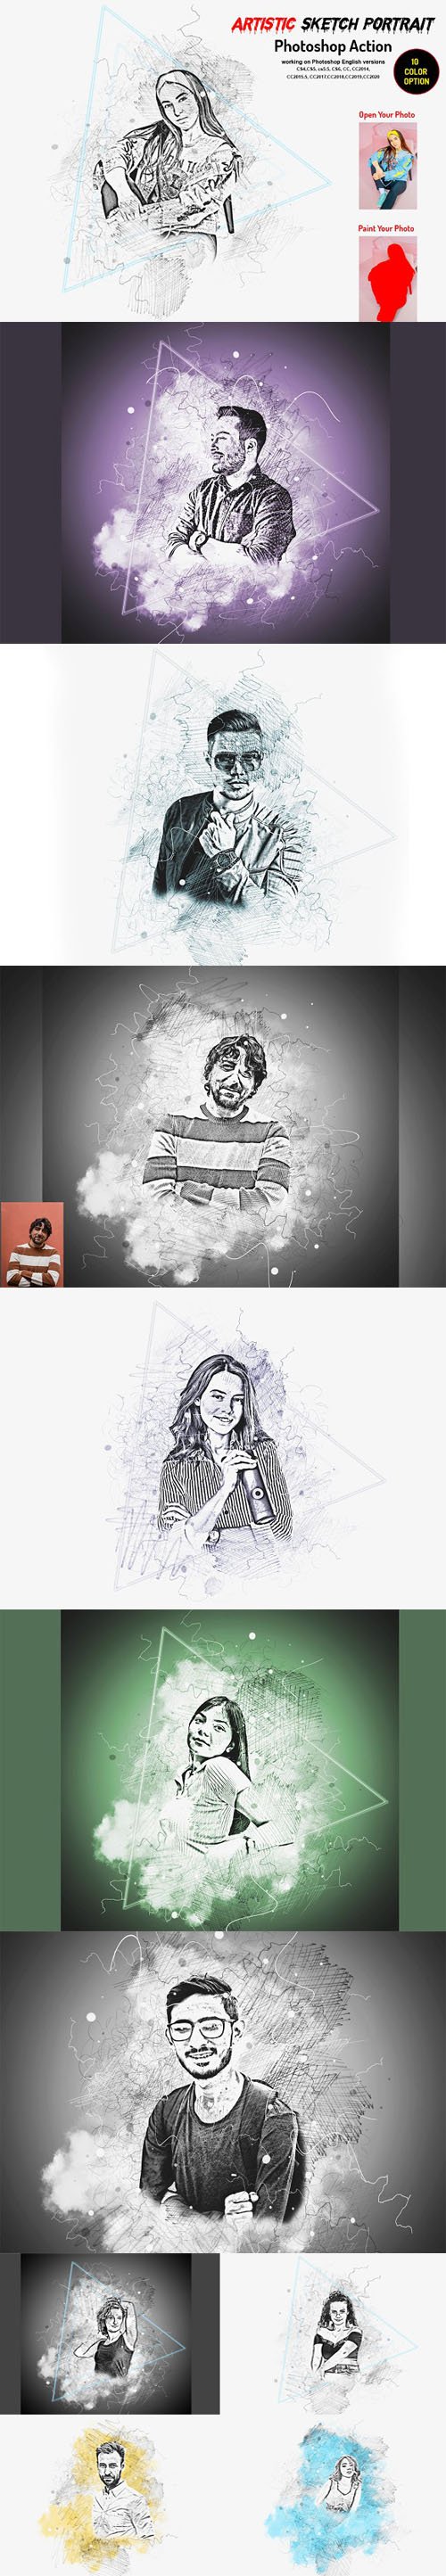 Artistic Sketch Portrait Action for Photoshop + Brushes